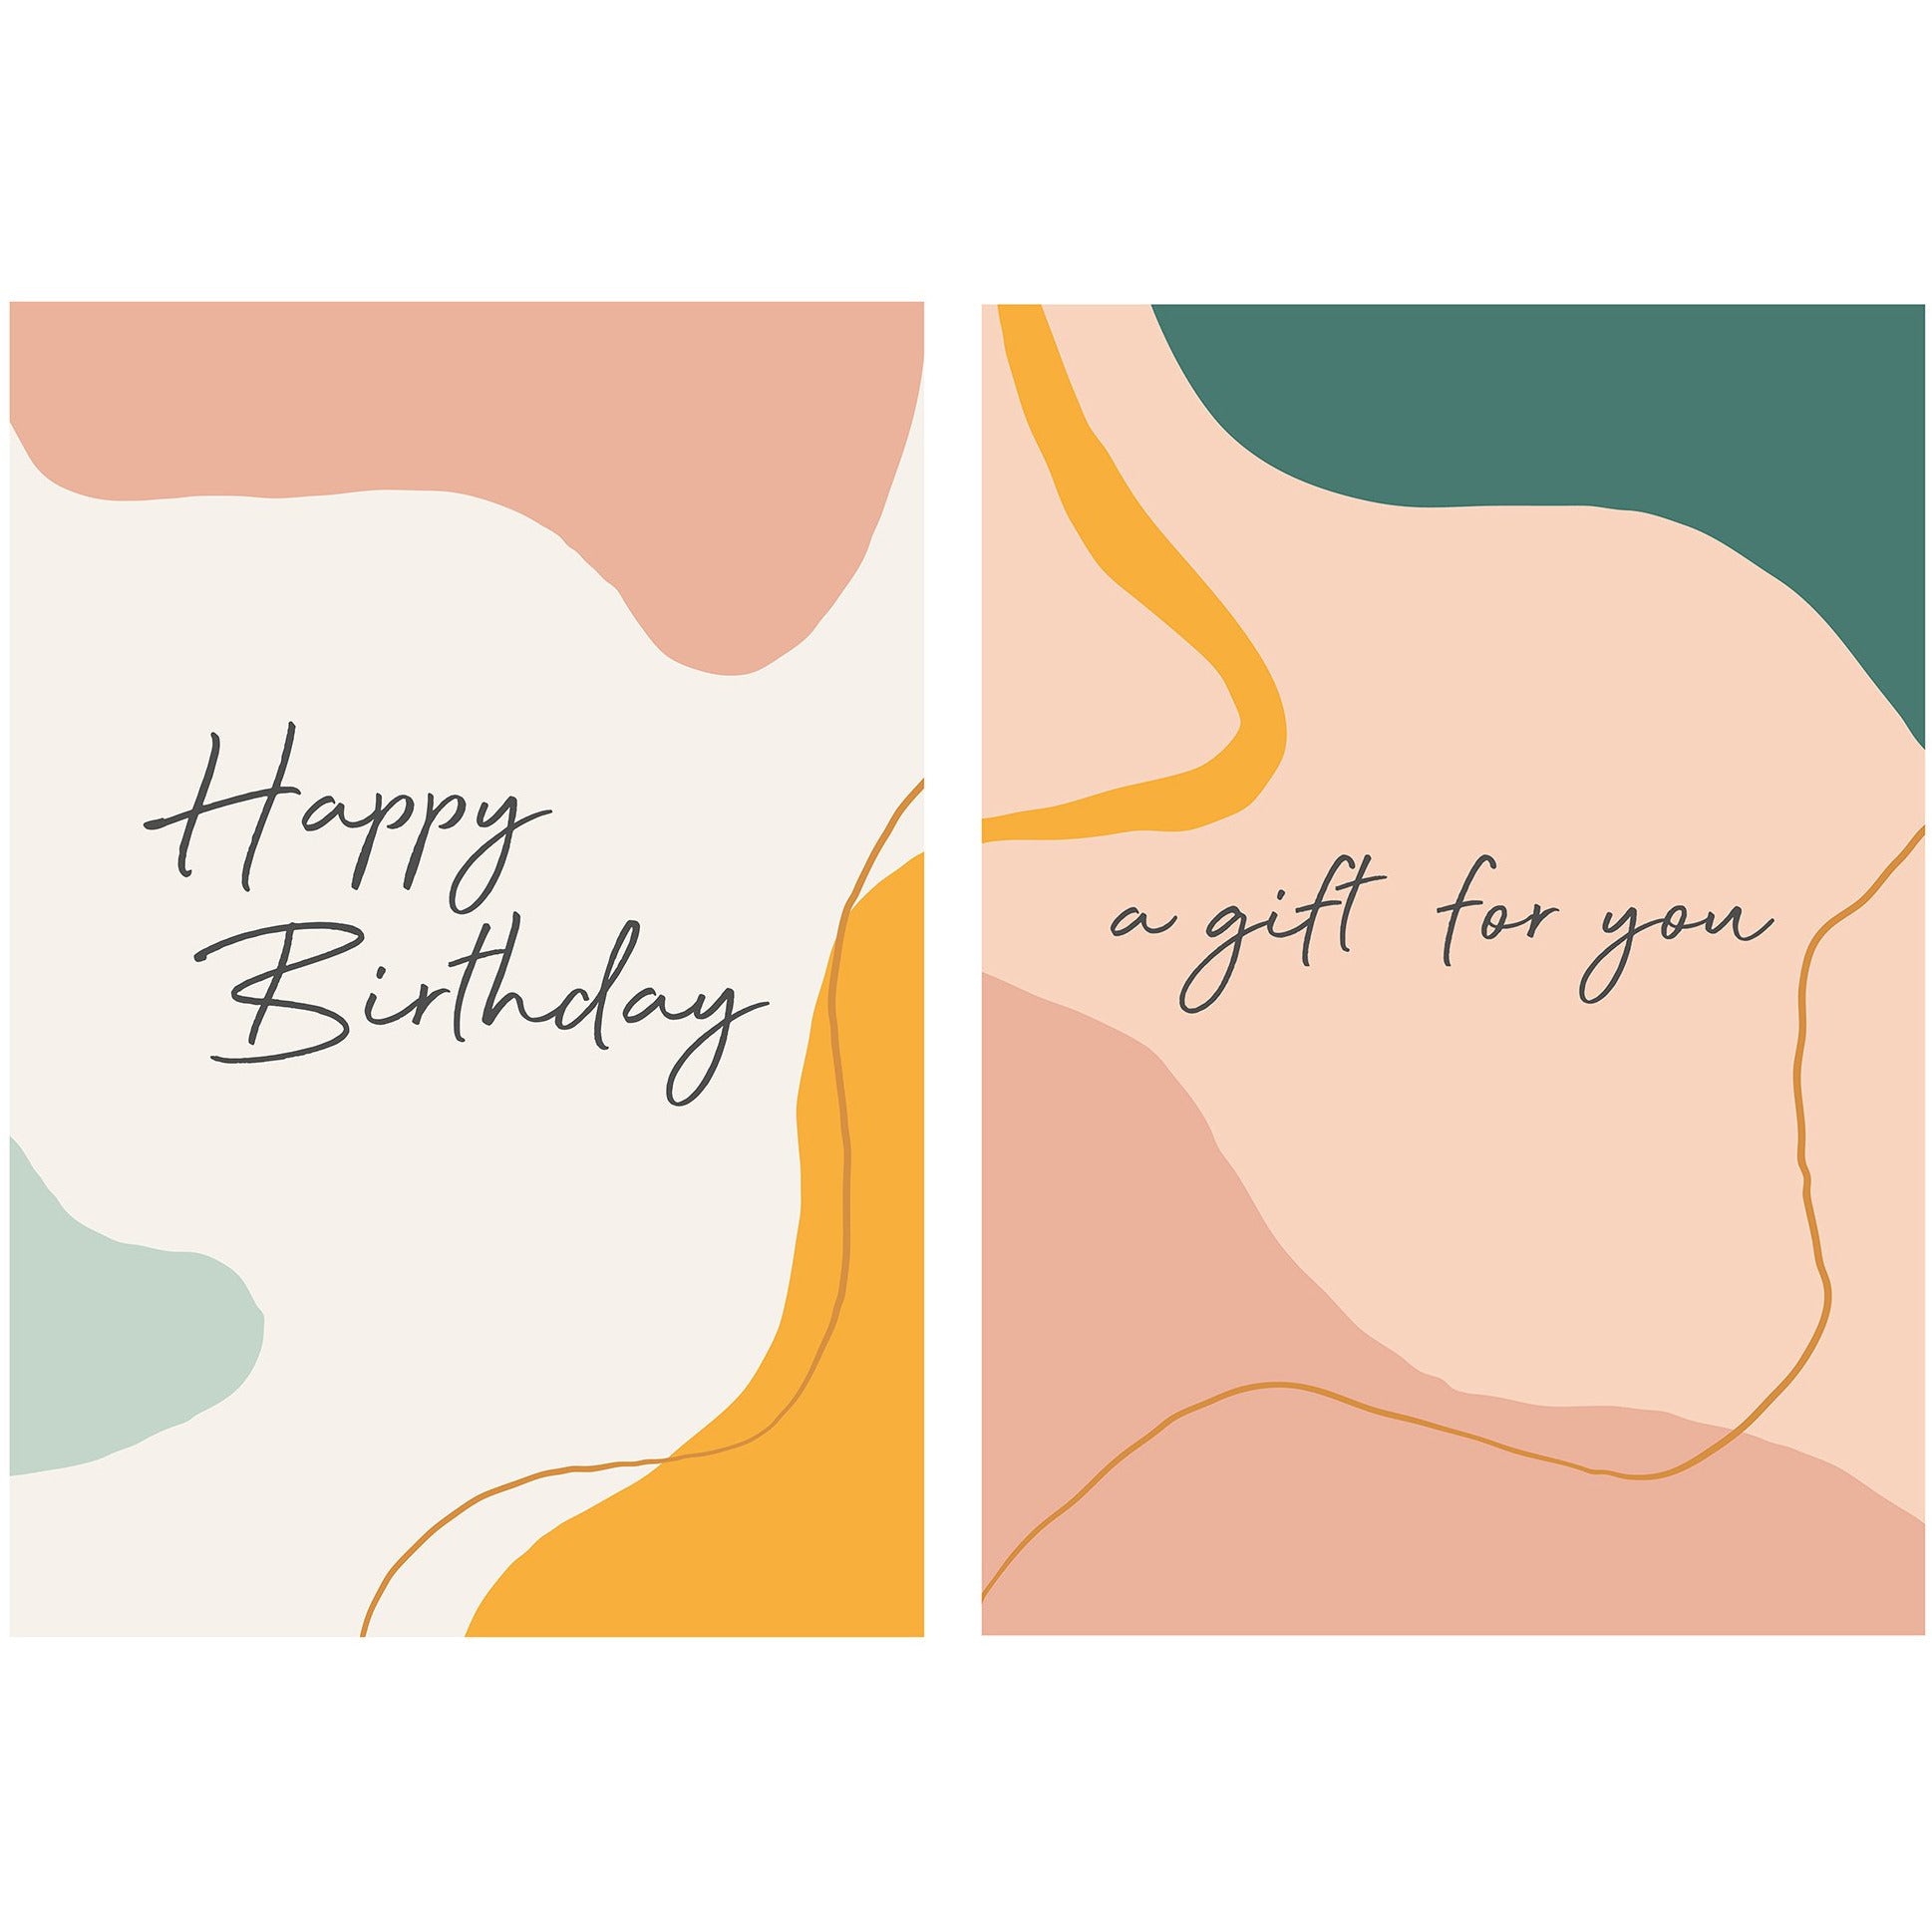 Two stylish greeting cards side by side with abstract art in muted colors of peach, green, and mustard. The left card reads 'Happy Birthday' in elegant cursive, while the right card says 'a gift for you,' offering a warm and modern way to present gifts from 360 Botanics